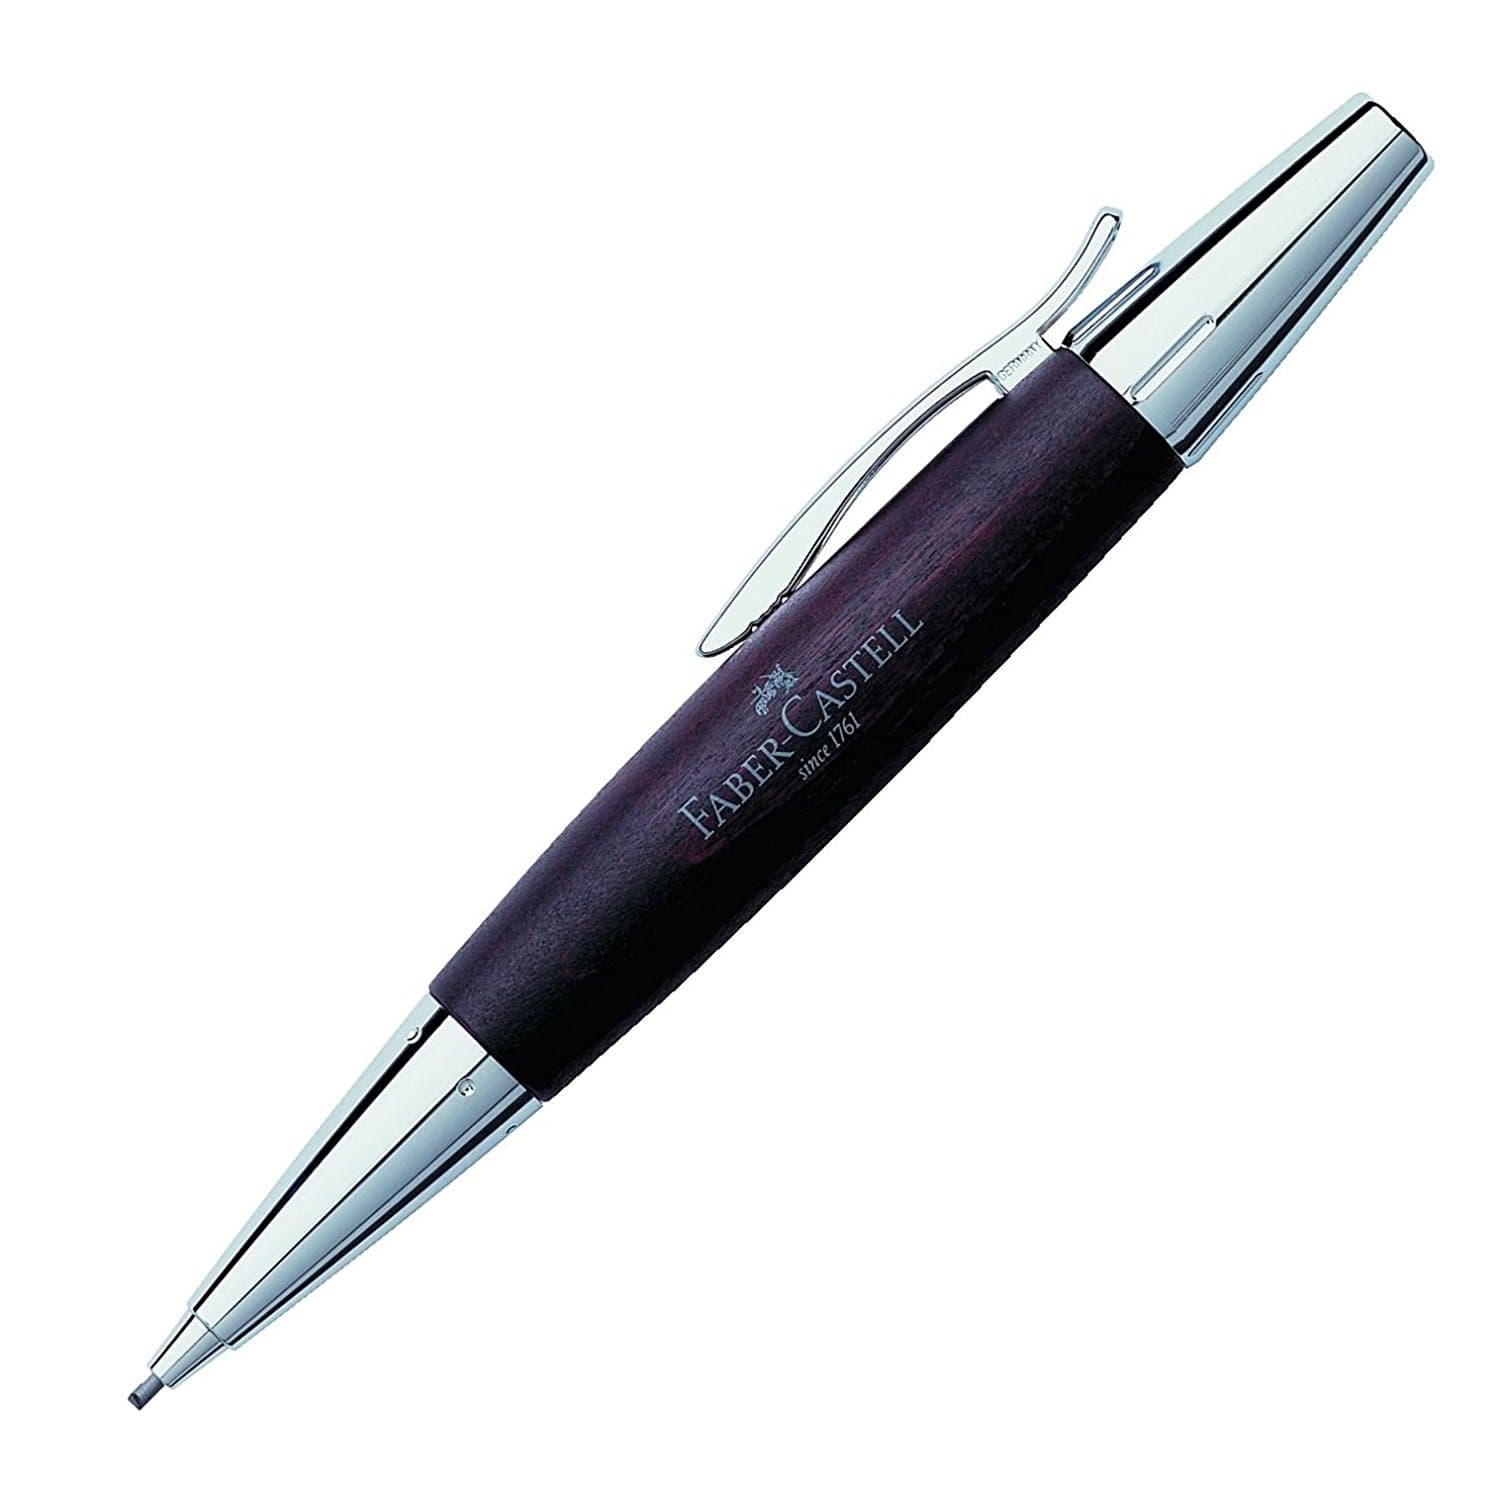 Faber-Castell E-Motion Mechanical Pencil in Wood & Chrome Dark Brown - 1.4mm